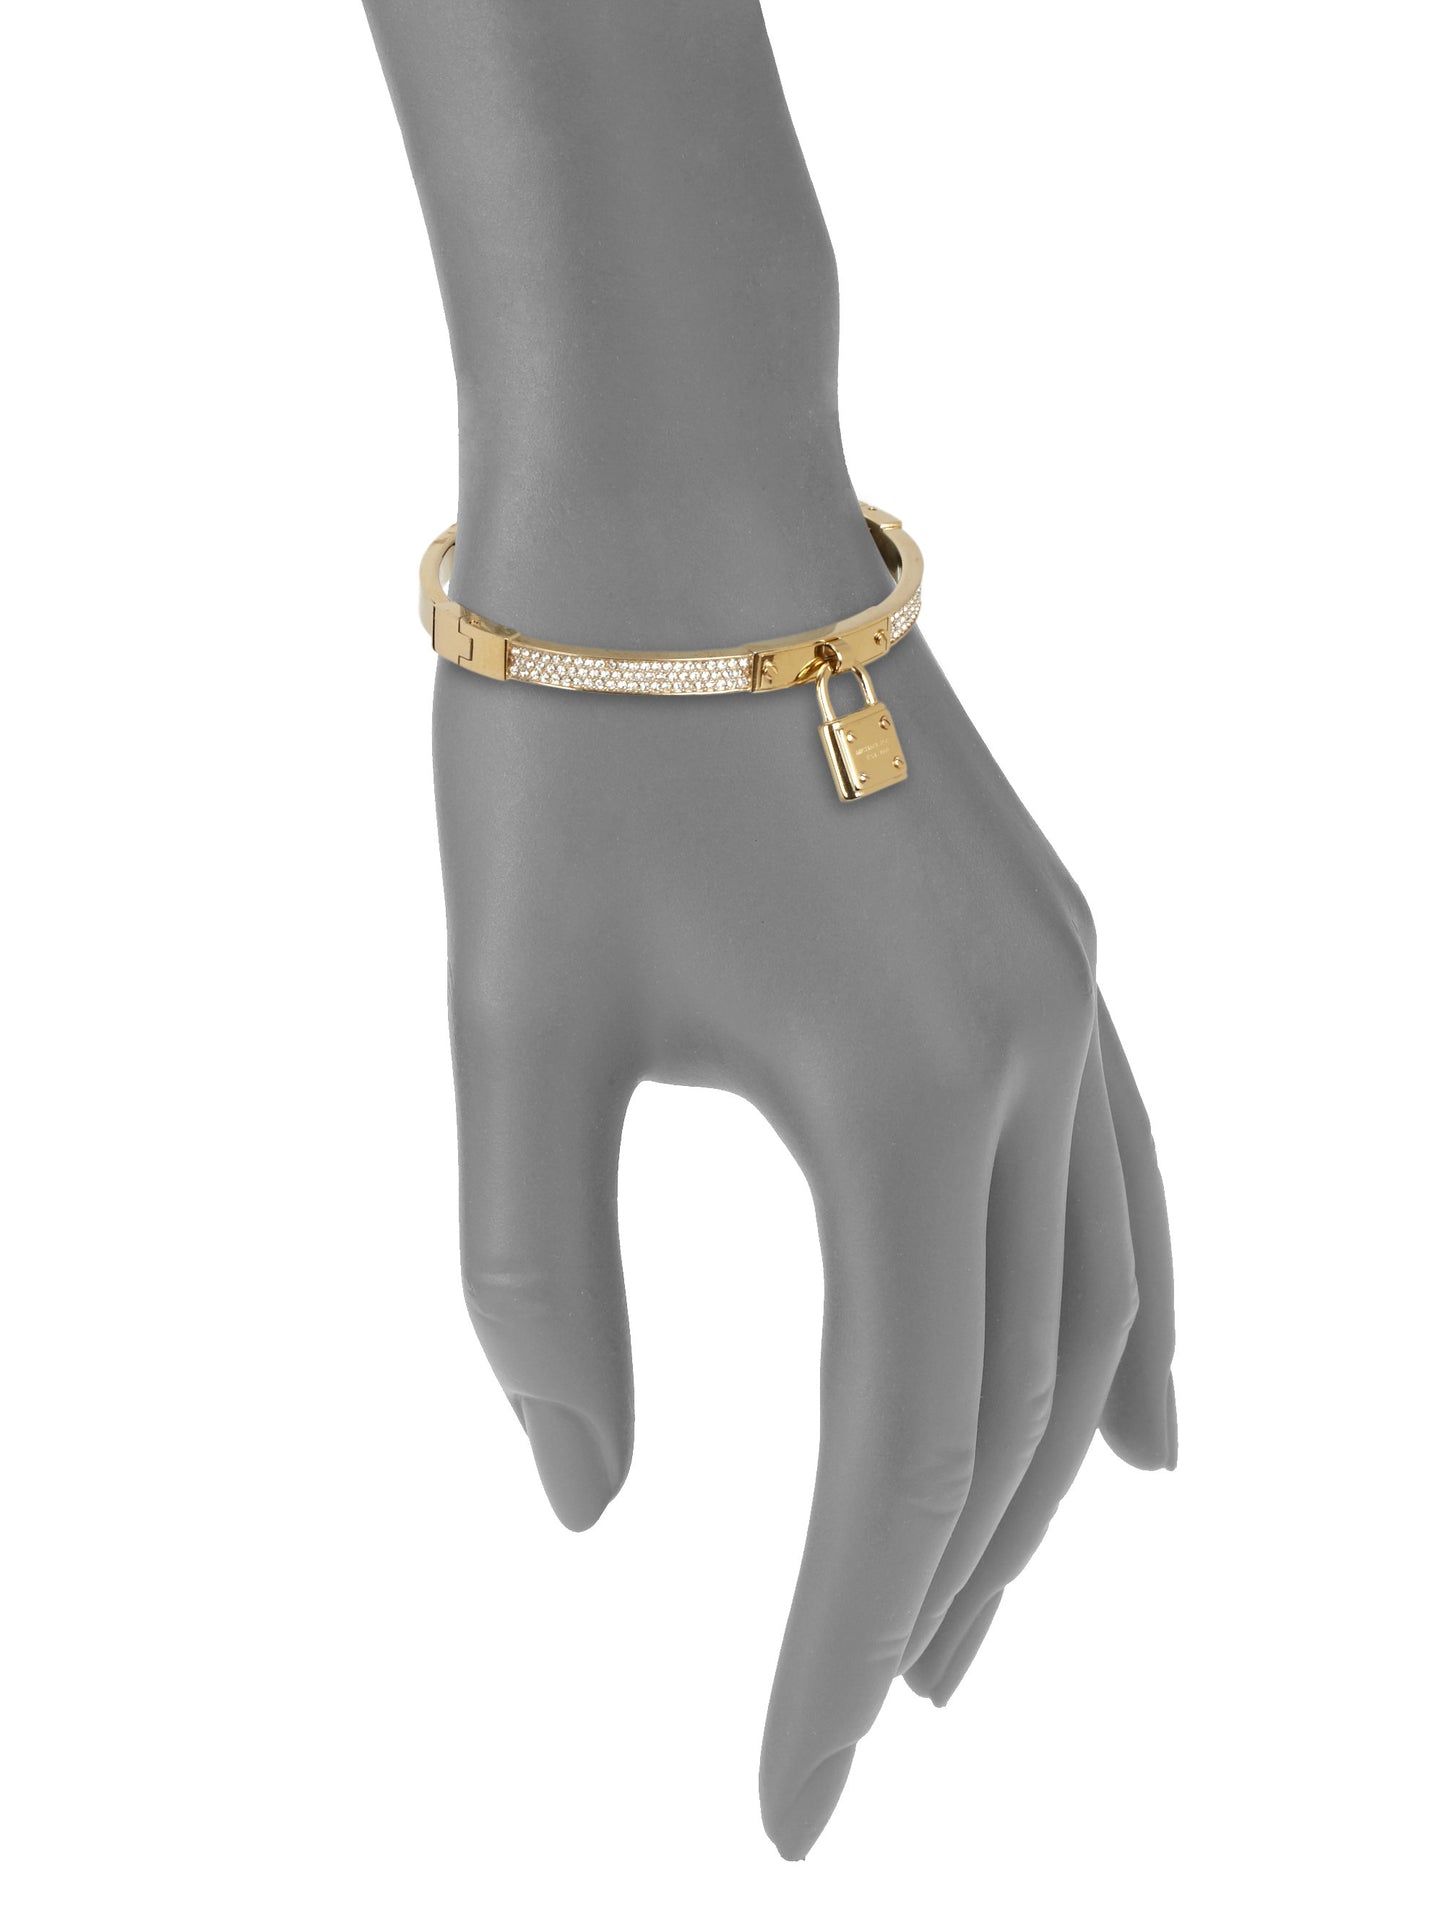 Stainless Steel Gold Tone Micheal Kors Bangle